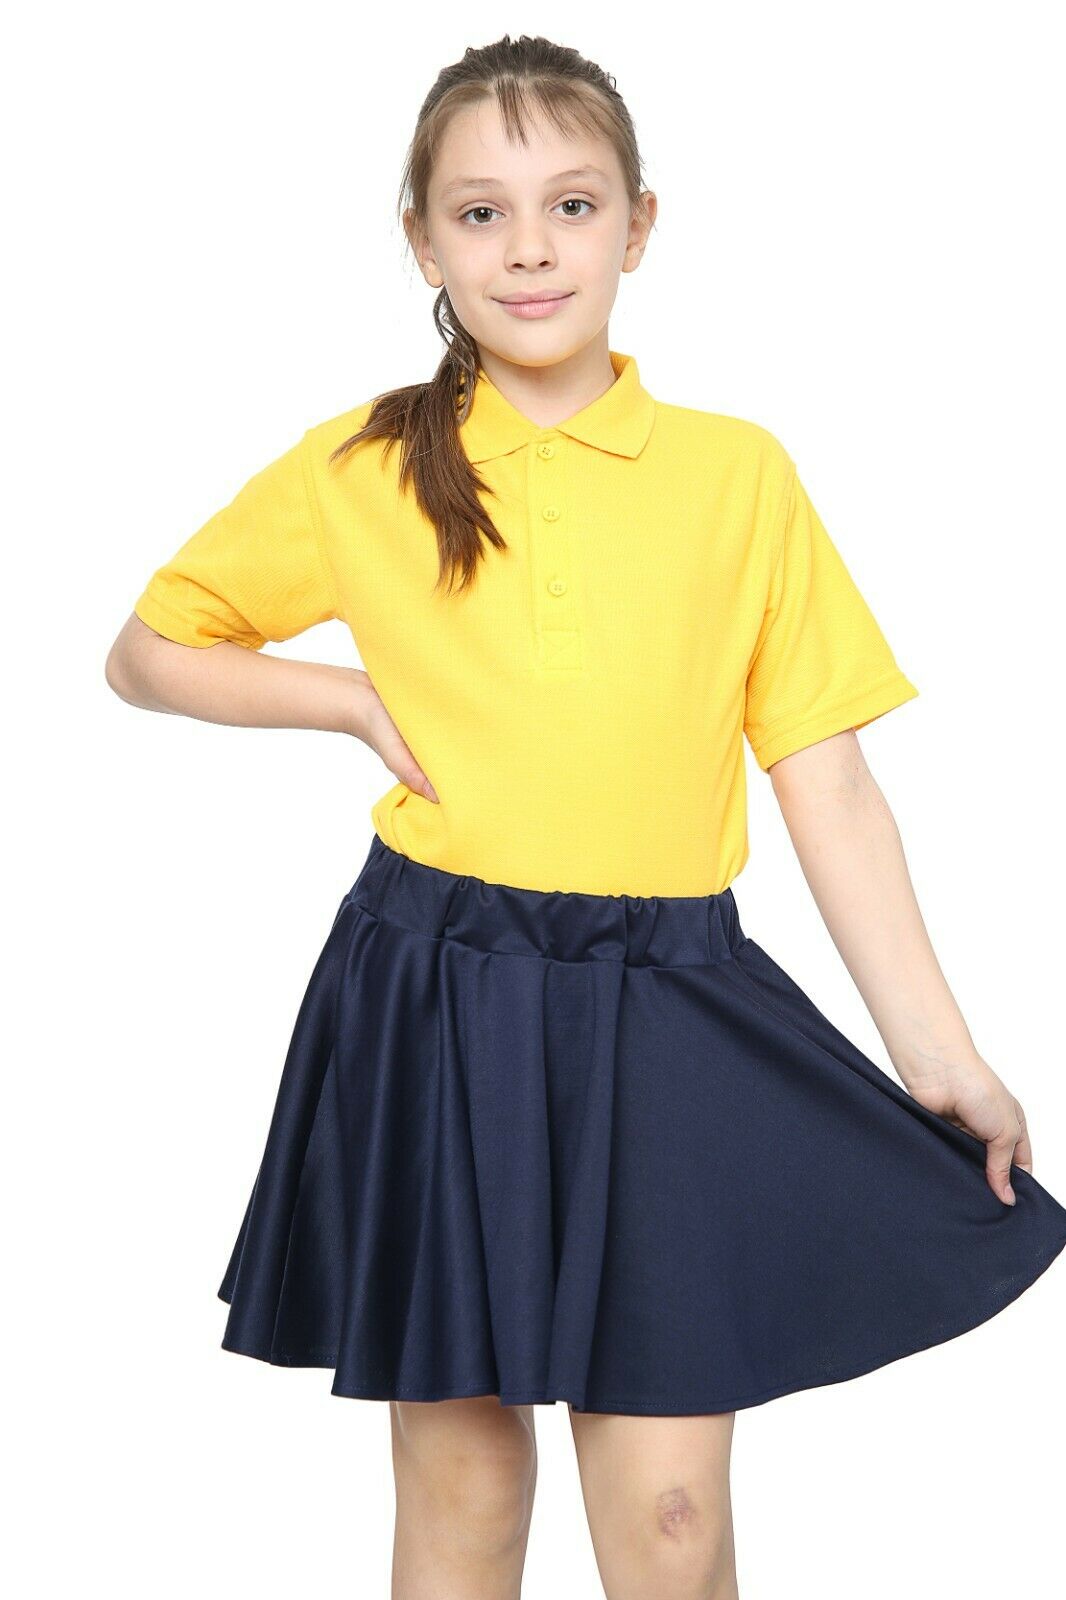 Skater Skirt Kids Casual Party and School Wear Navy Blue Skirts Girls 7 to 13 Years